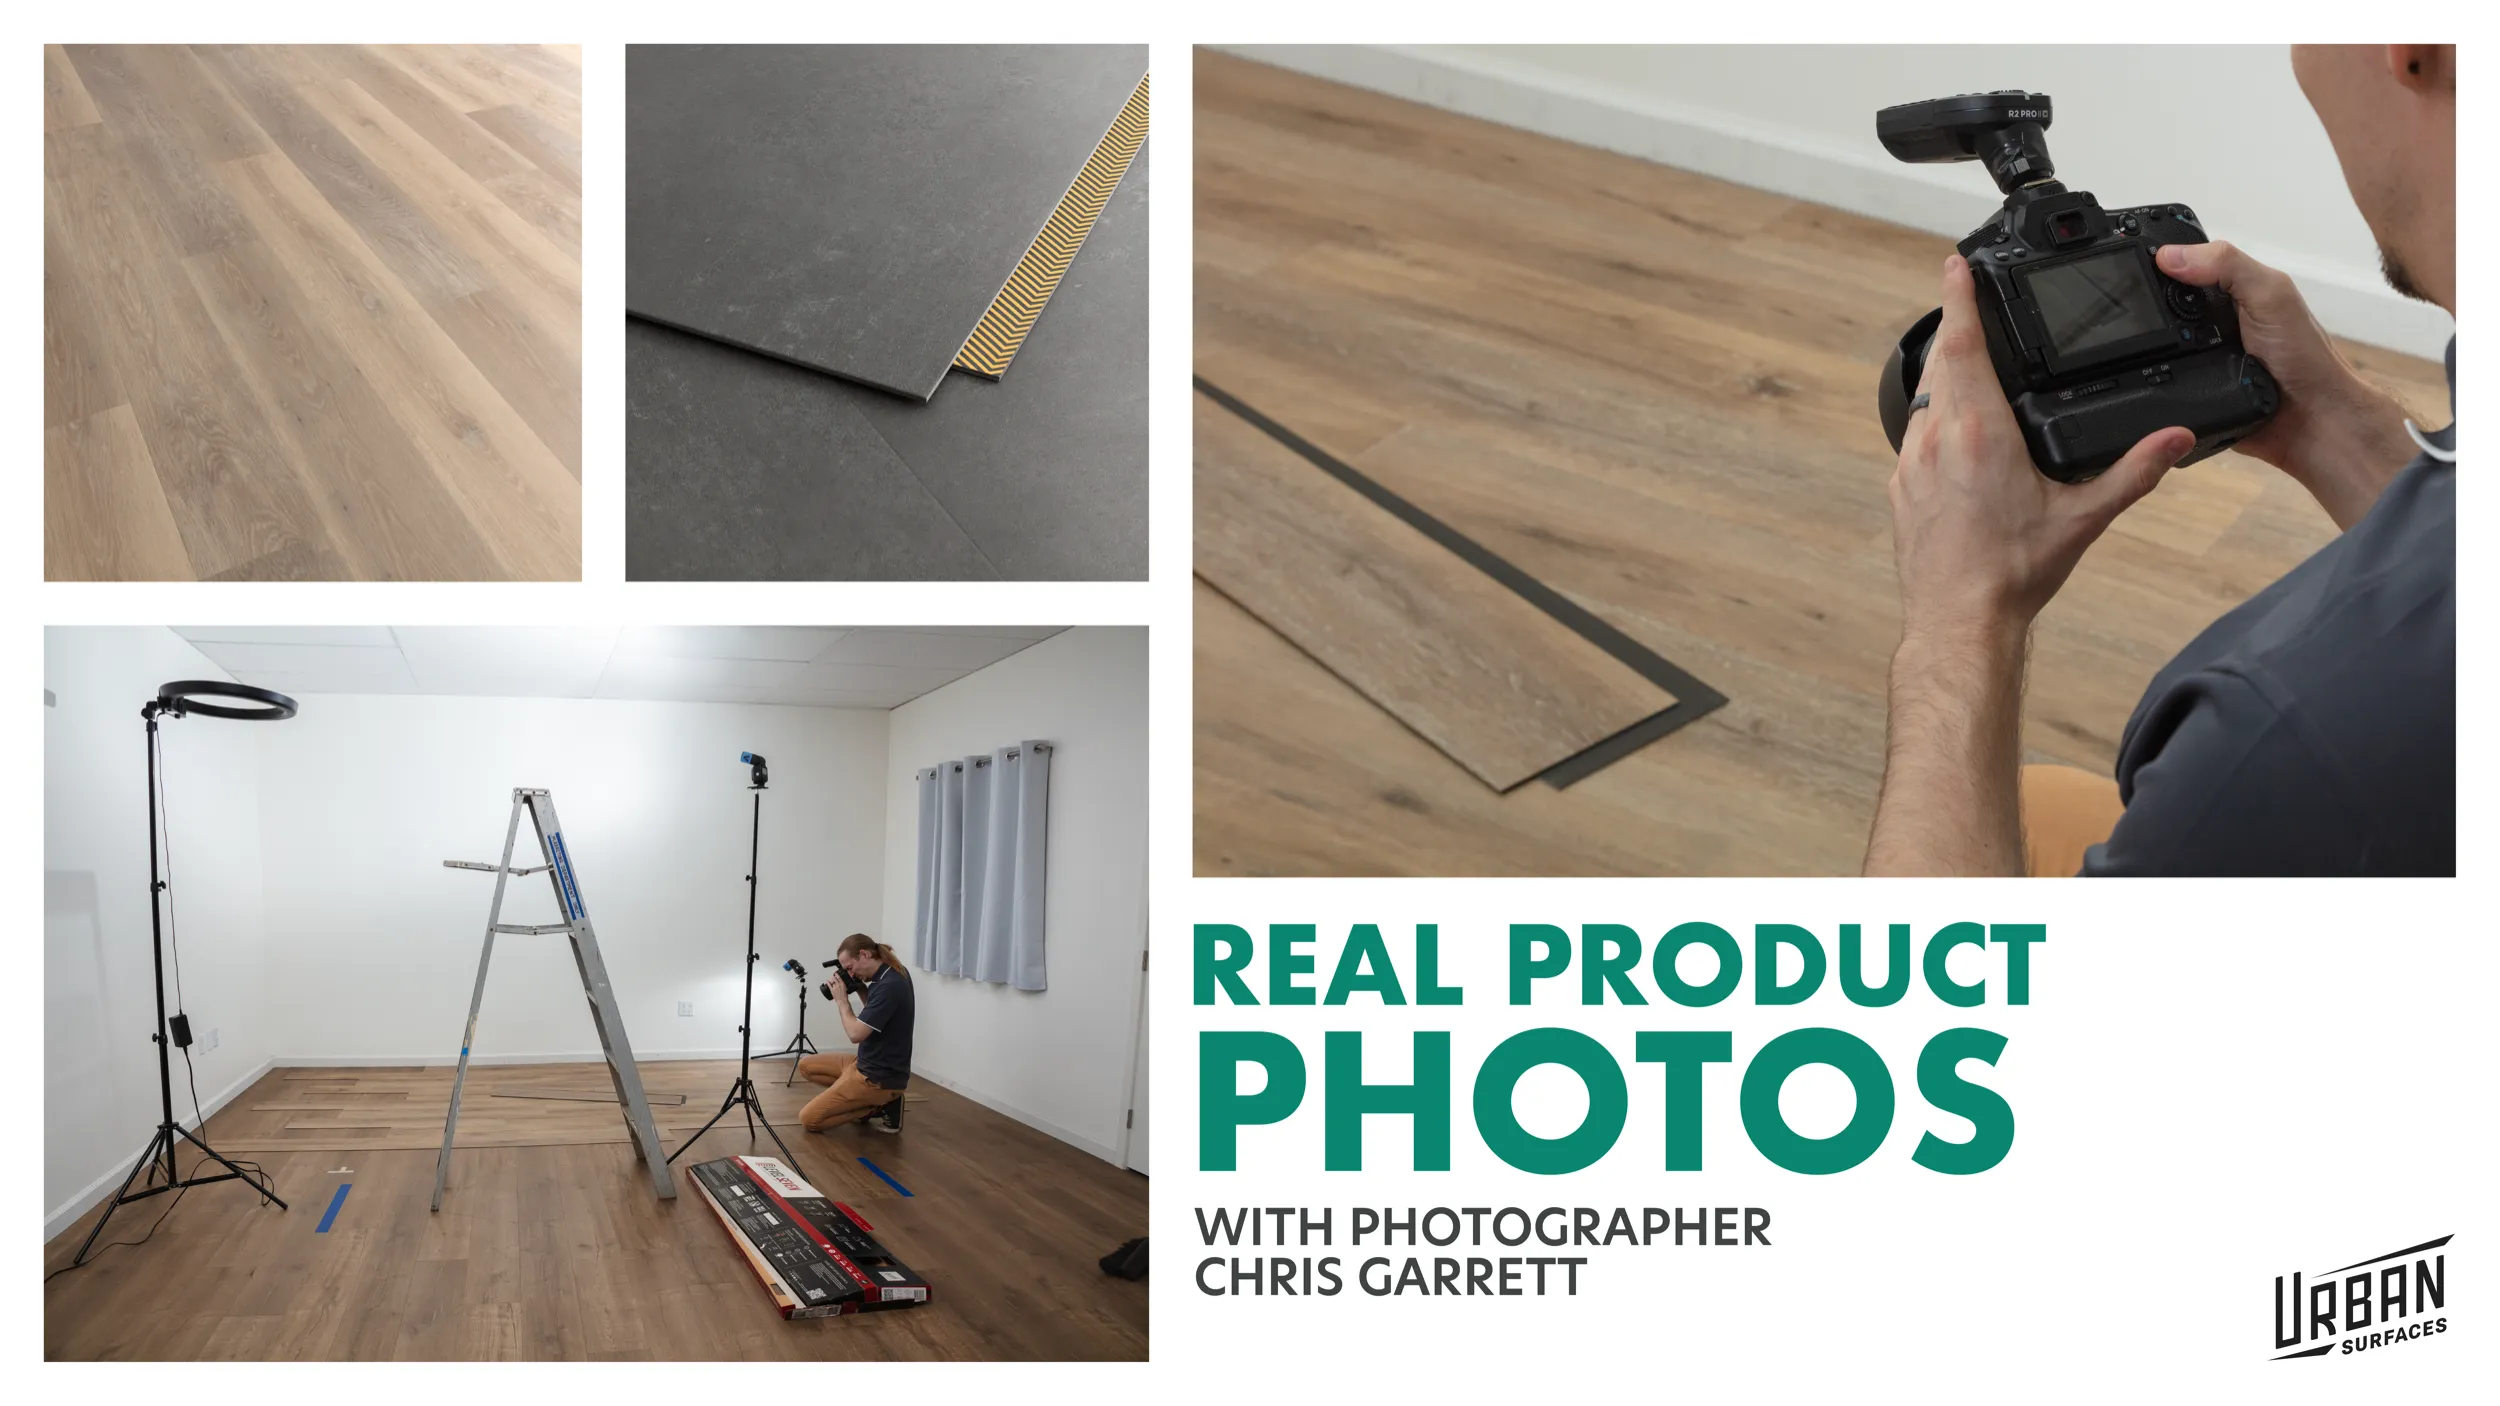 Four images showing different shots of vinyl flooring and photographer, Chris, taking pictures with the text "Real Product Photos With Photographer Chris Garrett"